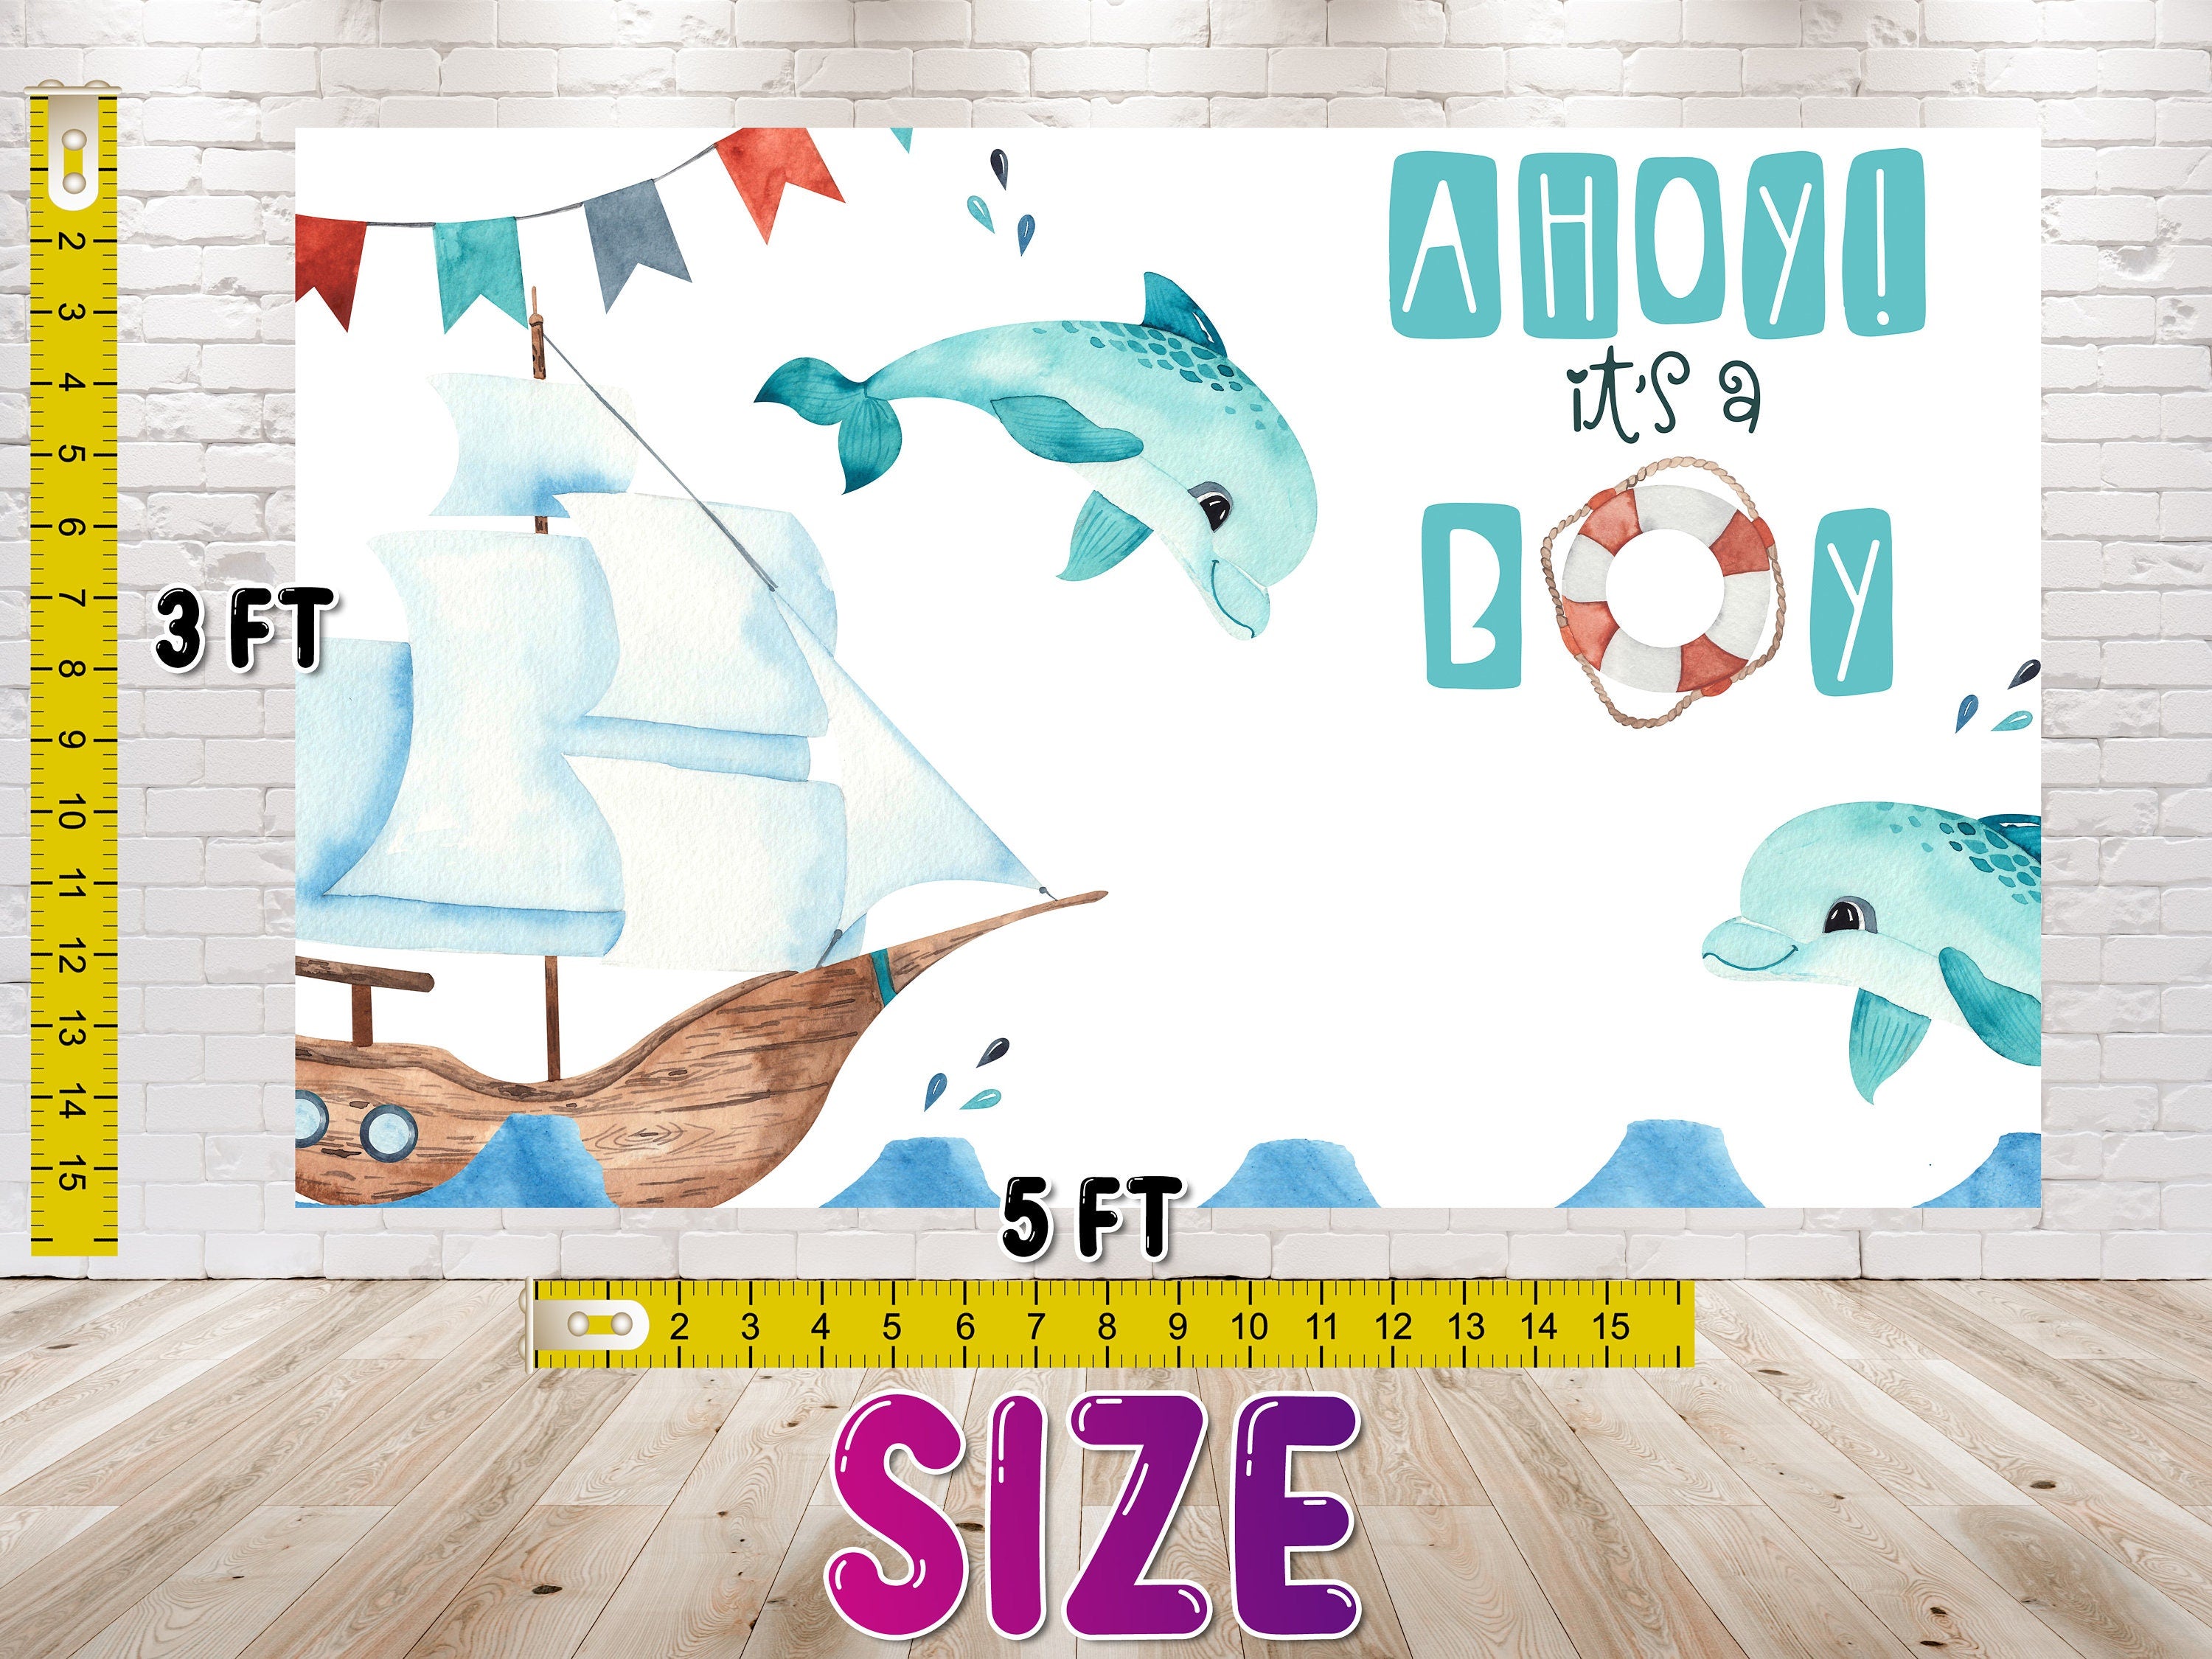 Under the Sea "It's a Boy" Baby Shower Backdrop 5x3 FT